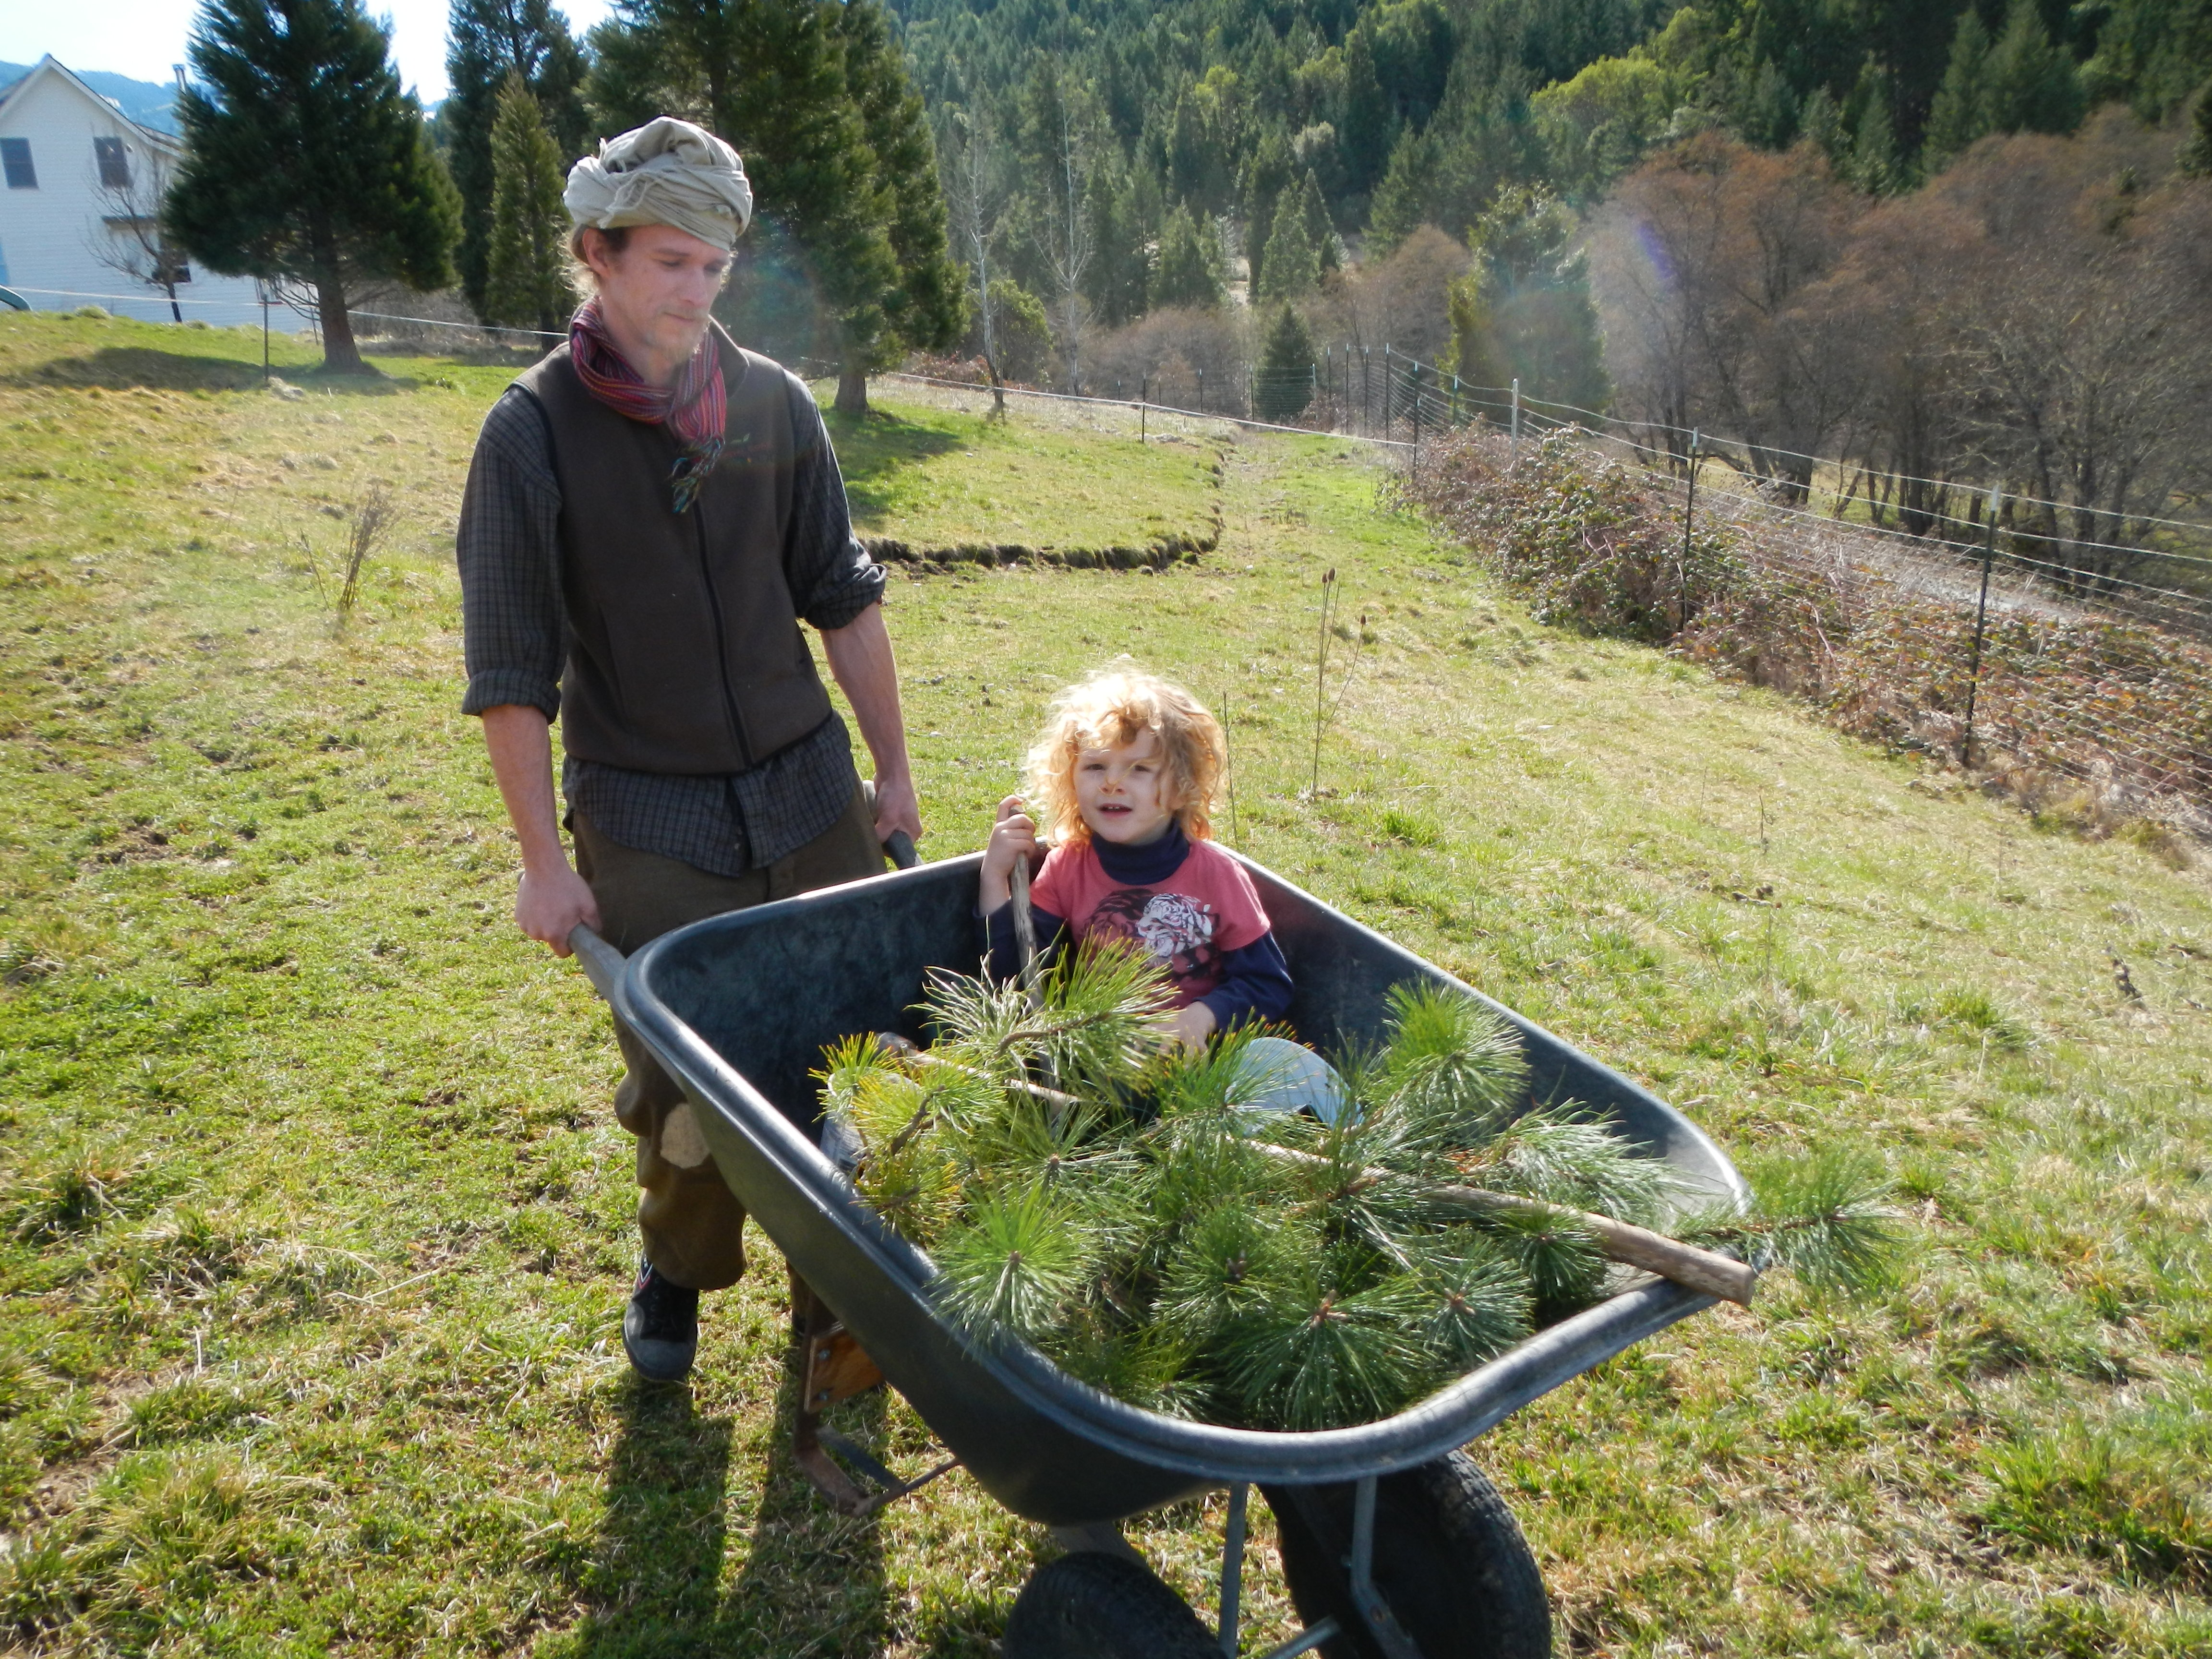 Caleb and his son Atreya are planting a Privacy hedge of native pine trees along the road that leads to Full Bloom.